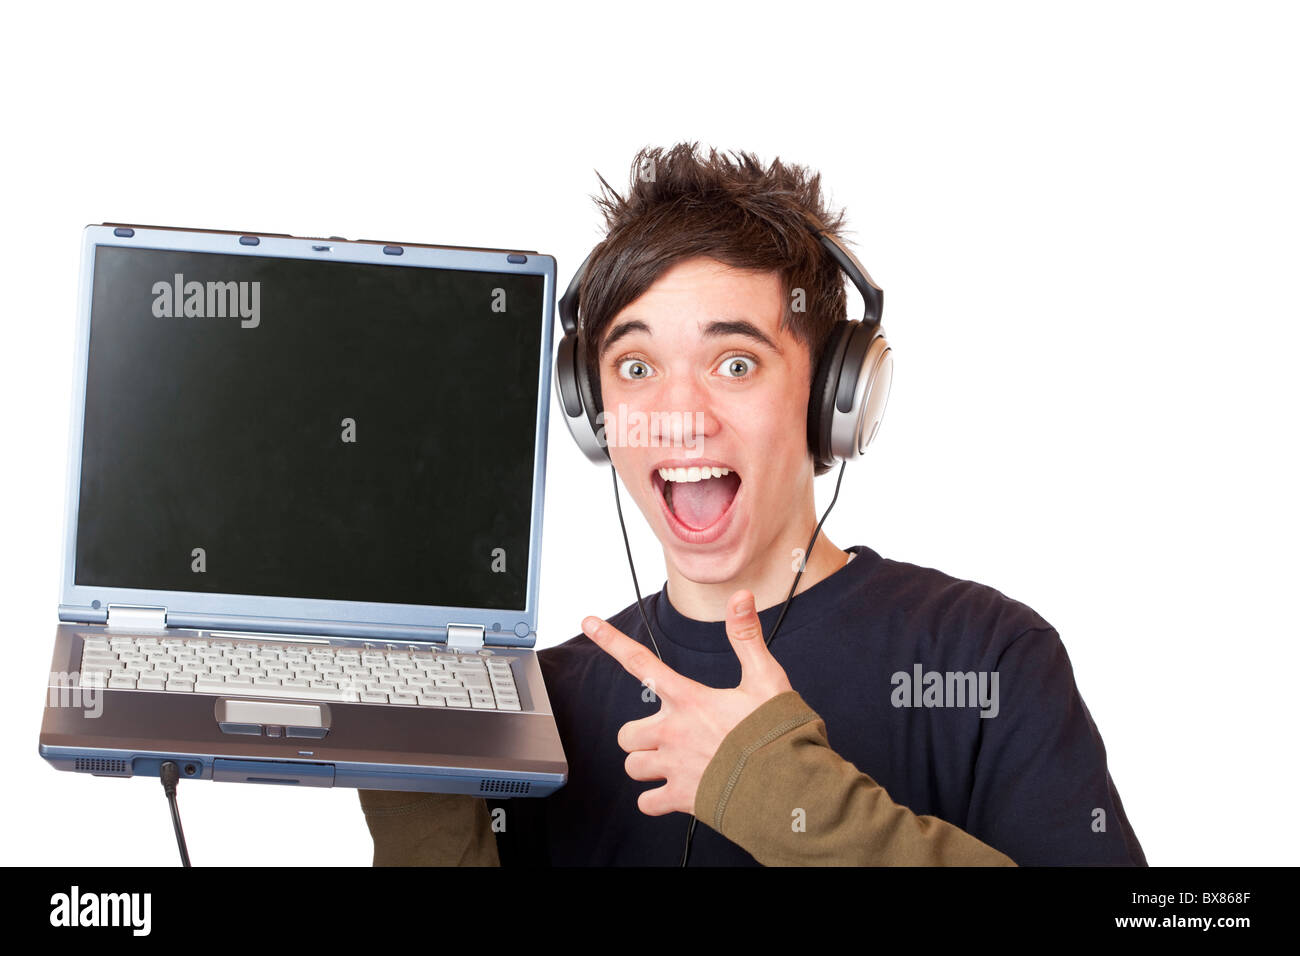 Male Teenager with earphones and laptop points enthusiastic at computer display. Isolated on white background. Stock Photo